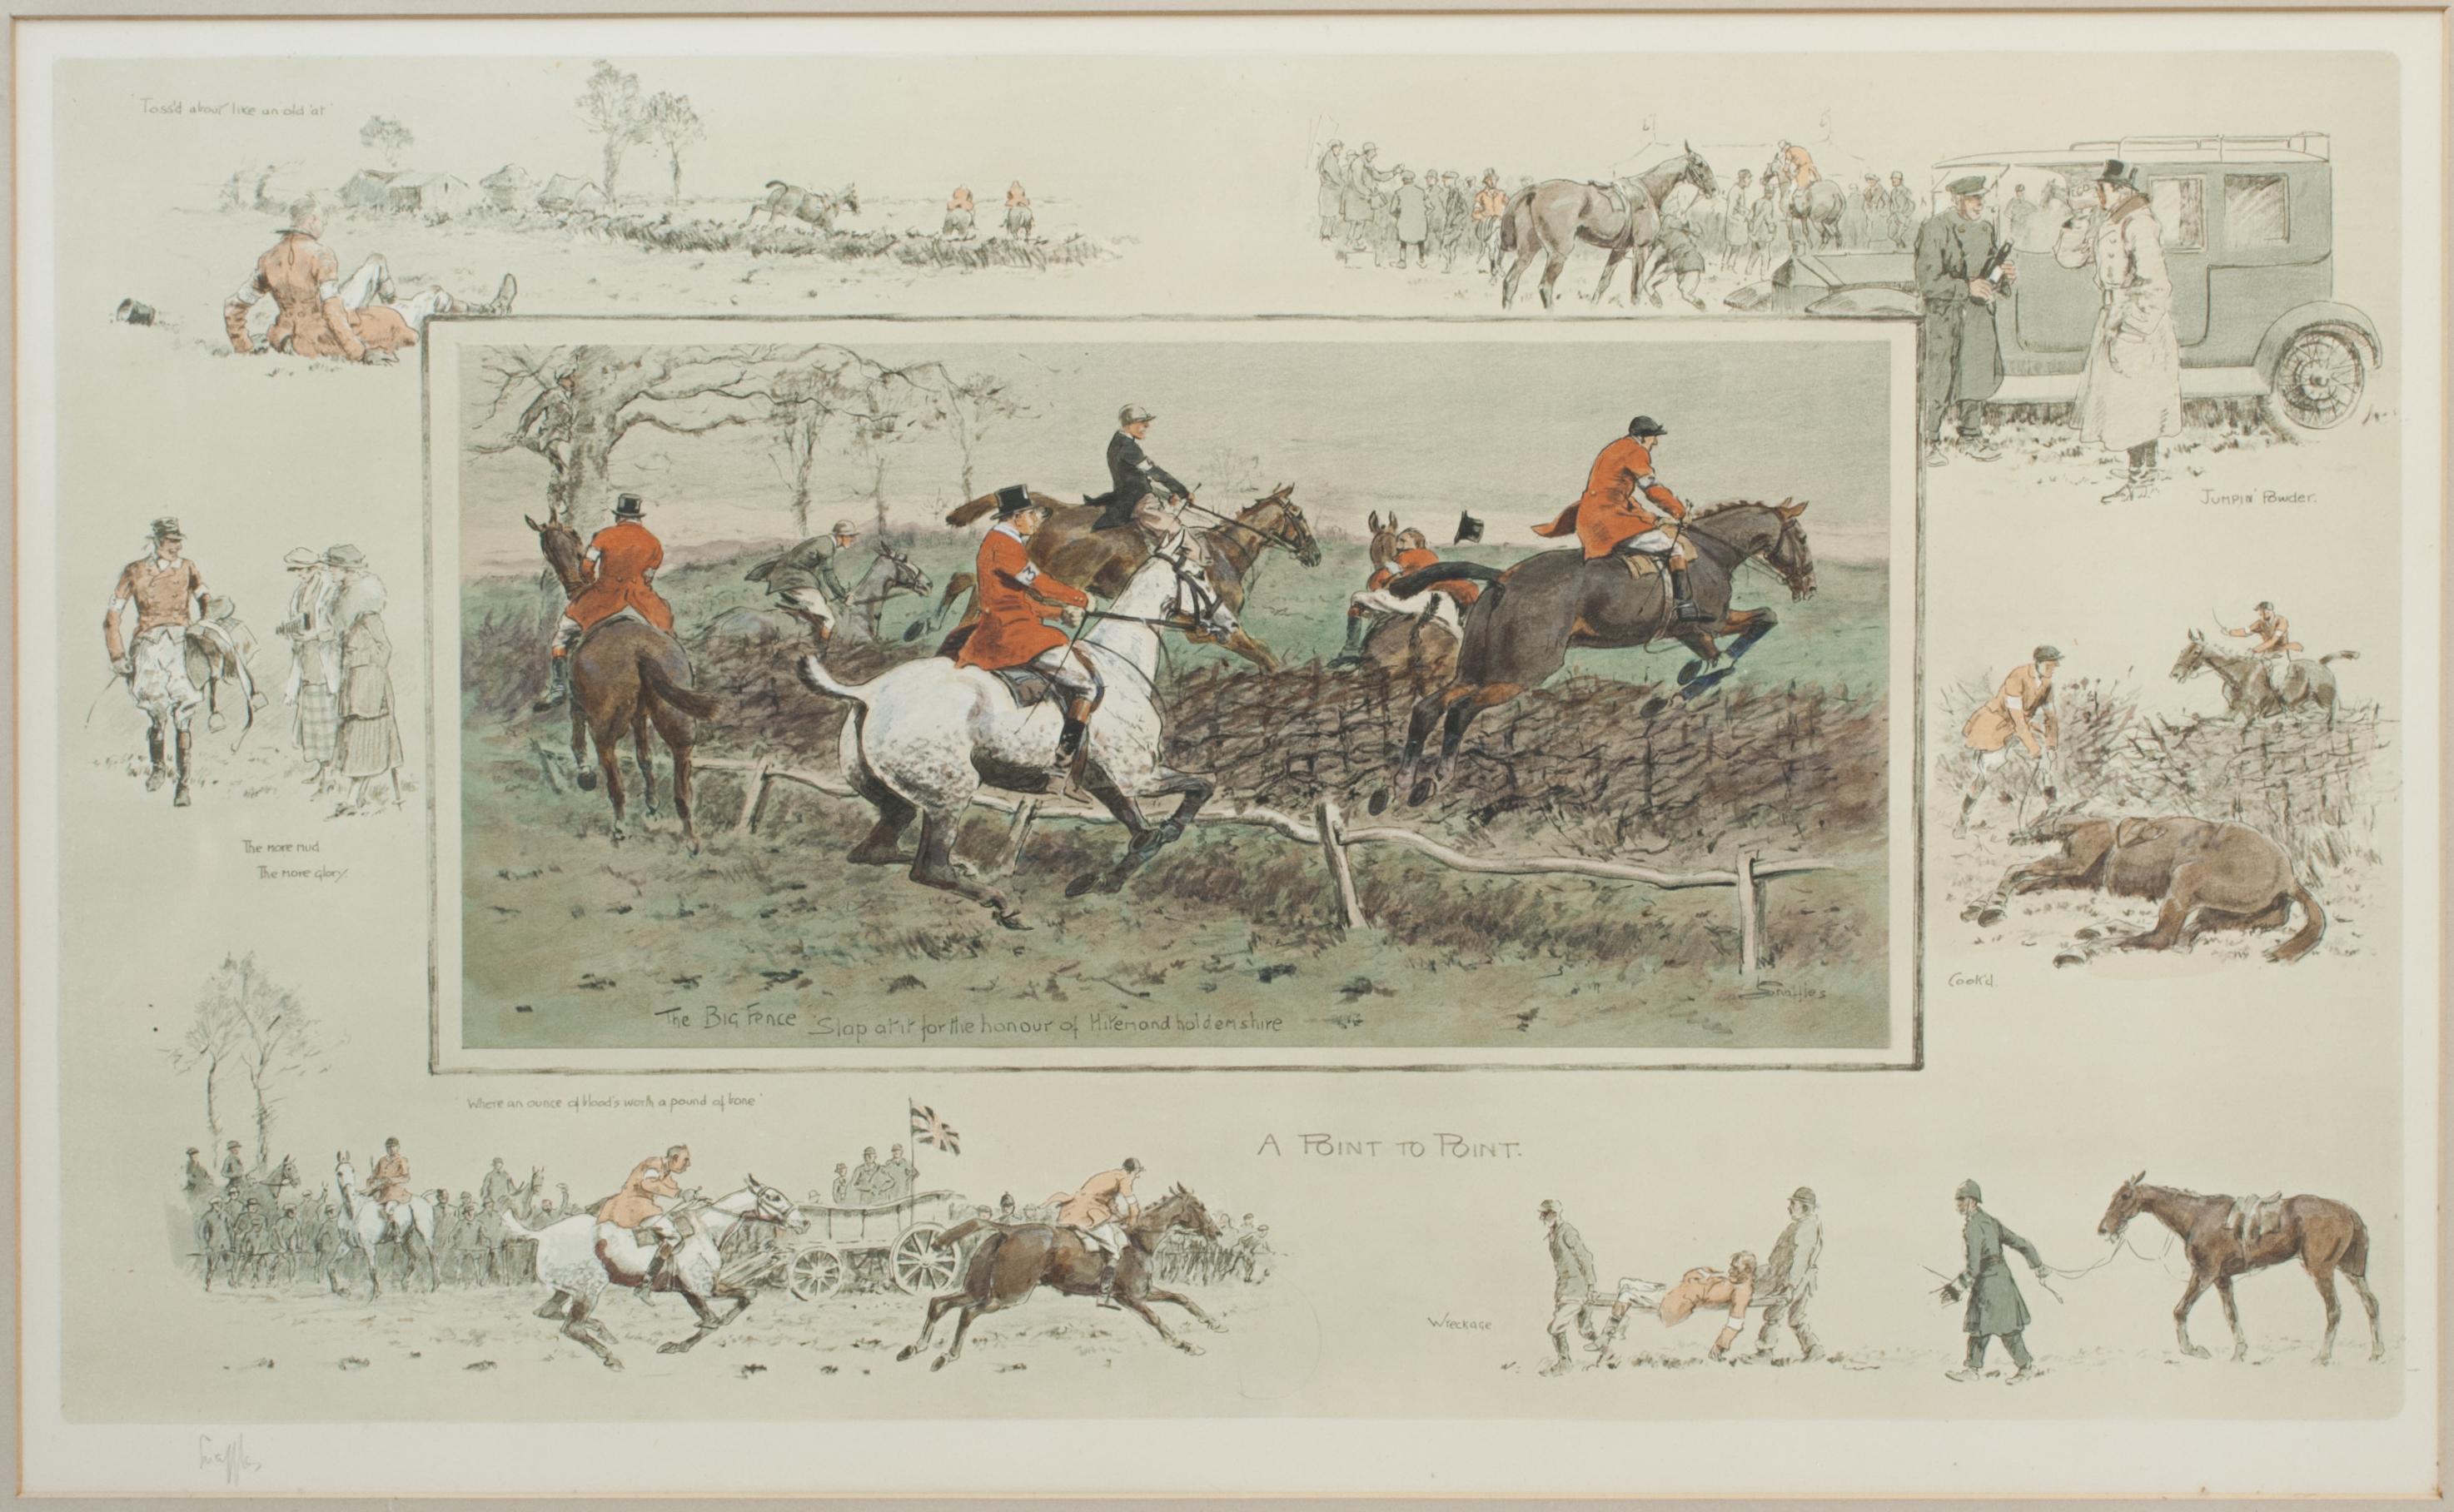 Sporting Art Vintage Snaffles Horse Racing Print, A Point To Point. Charles Johnson Payne. For Sale